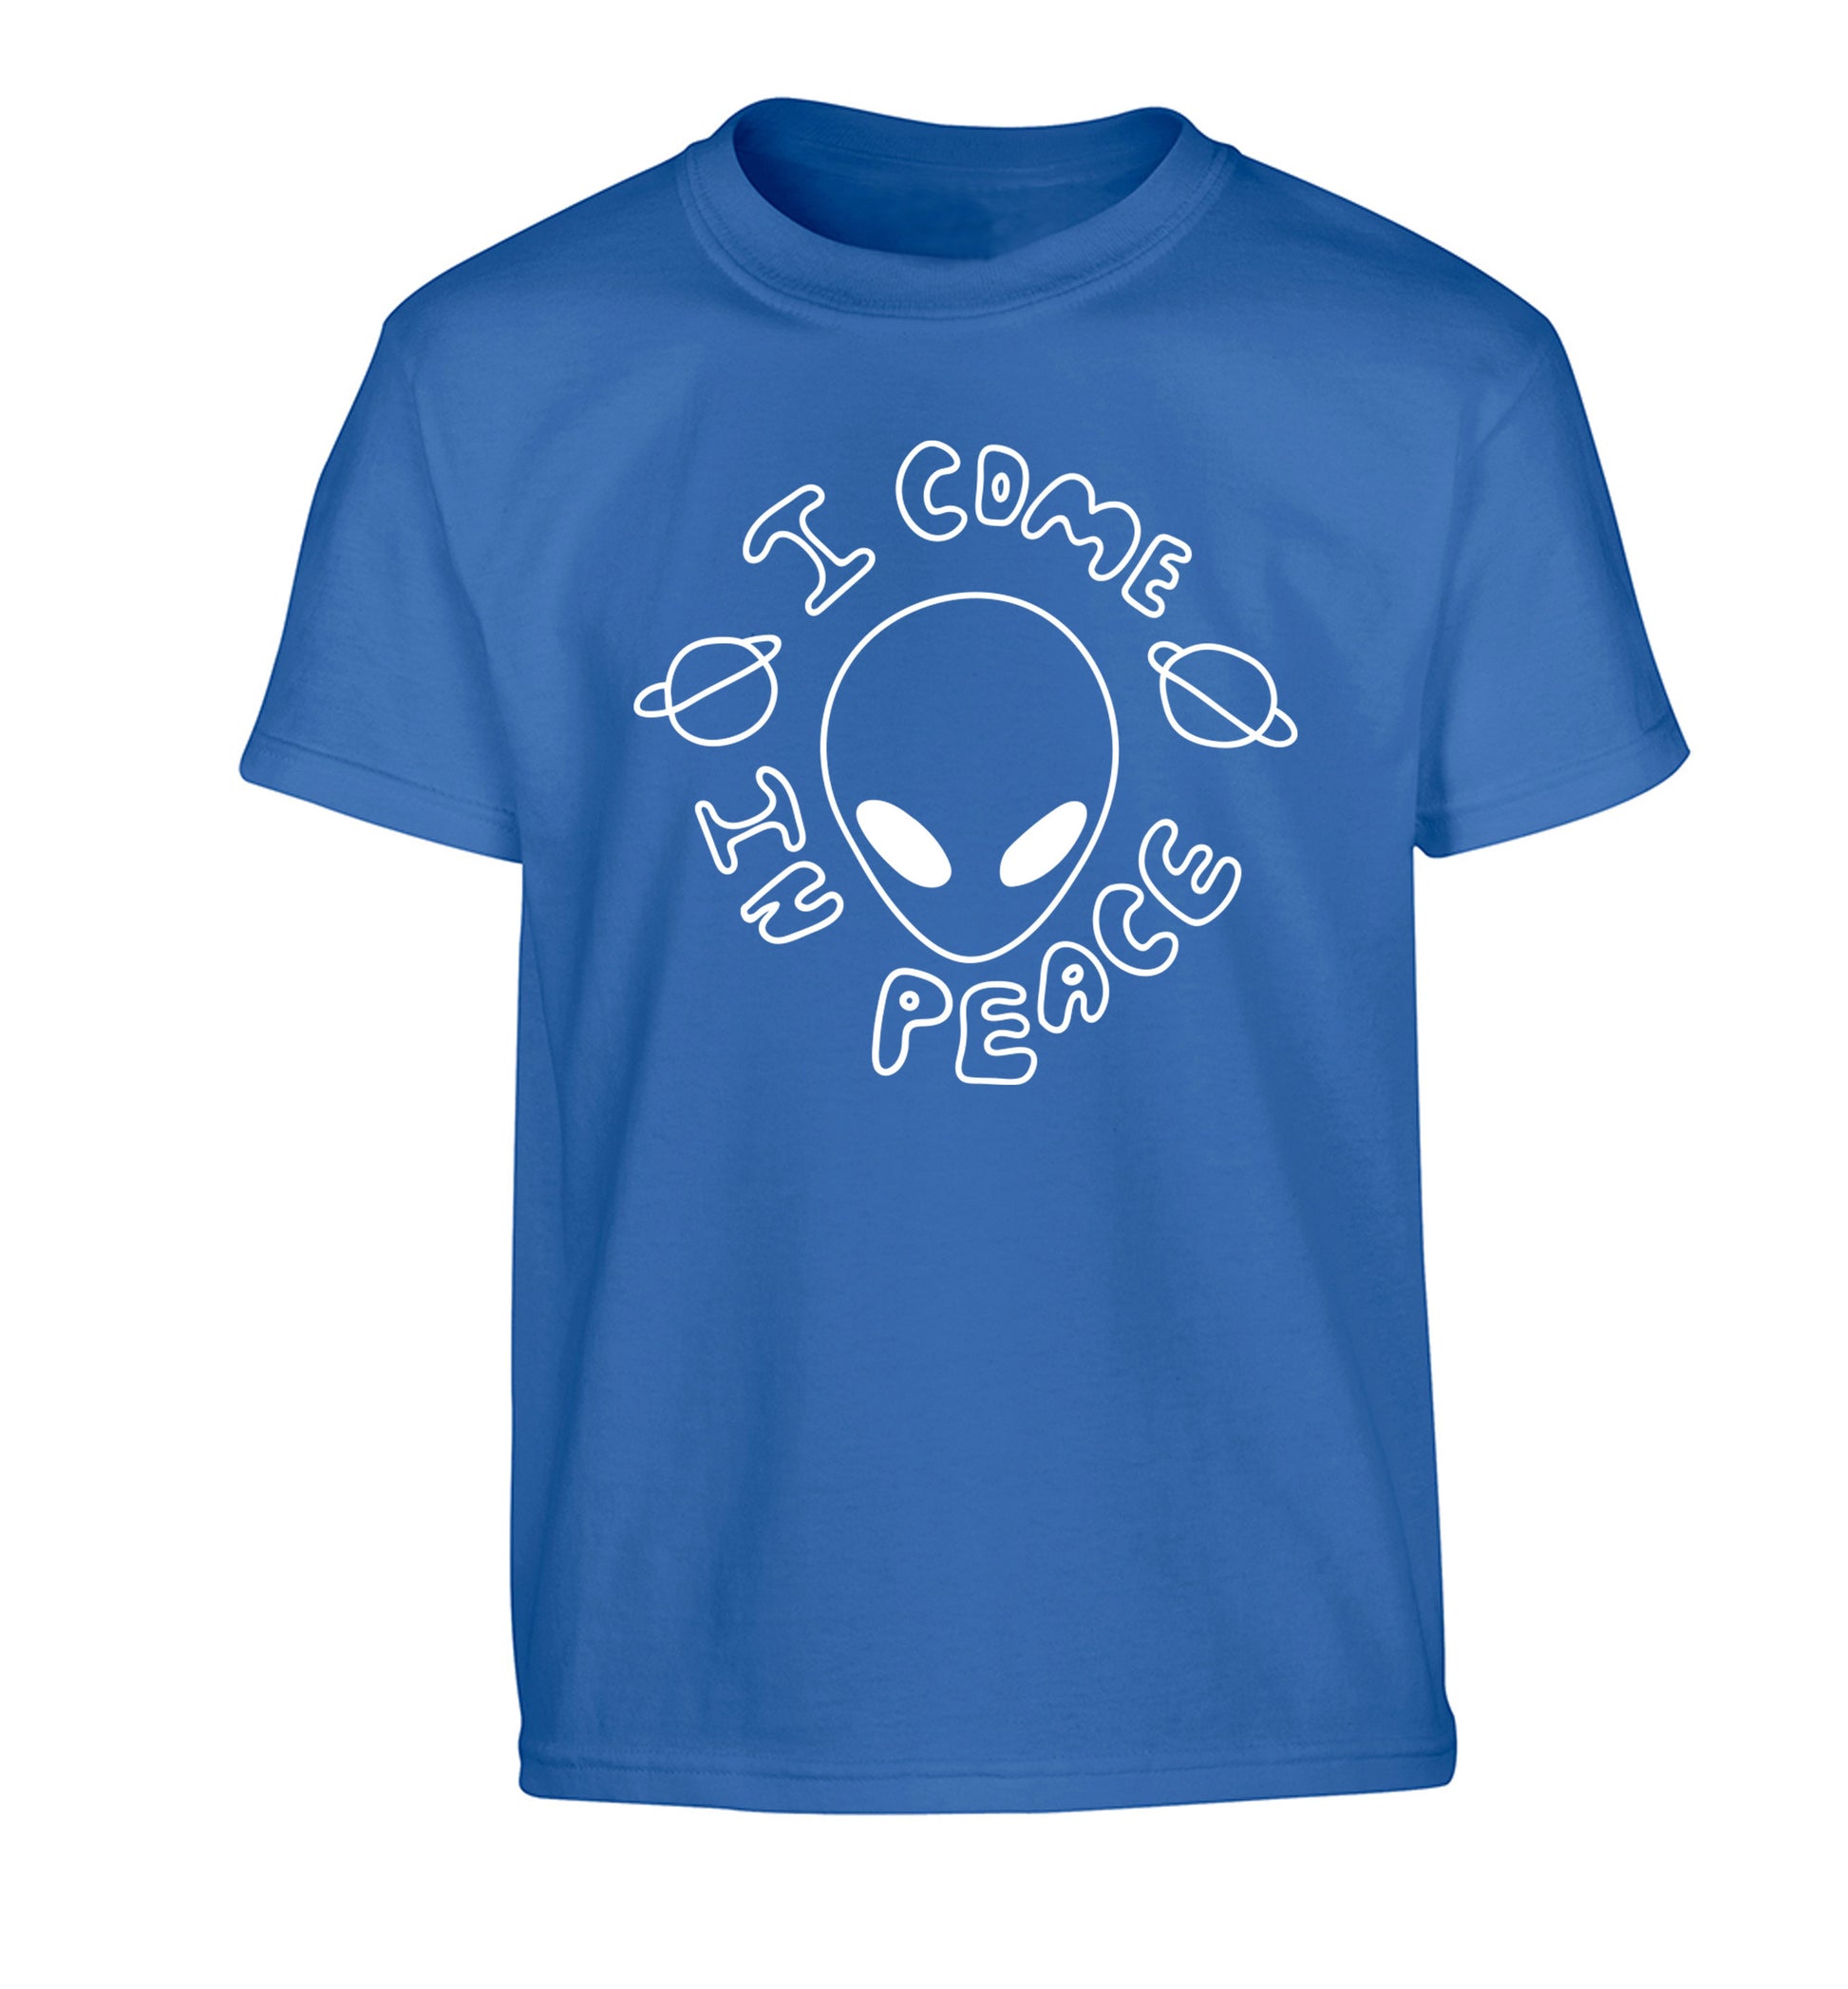 I come in peace Children's blue Tshirt 12-14 Years